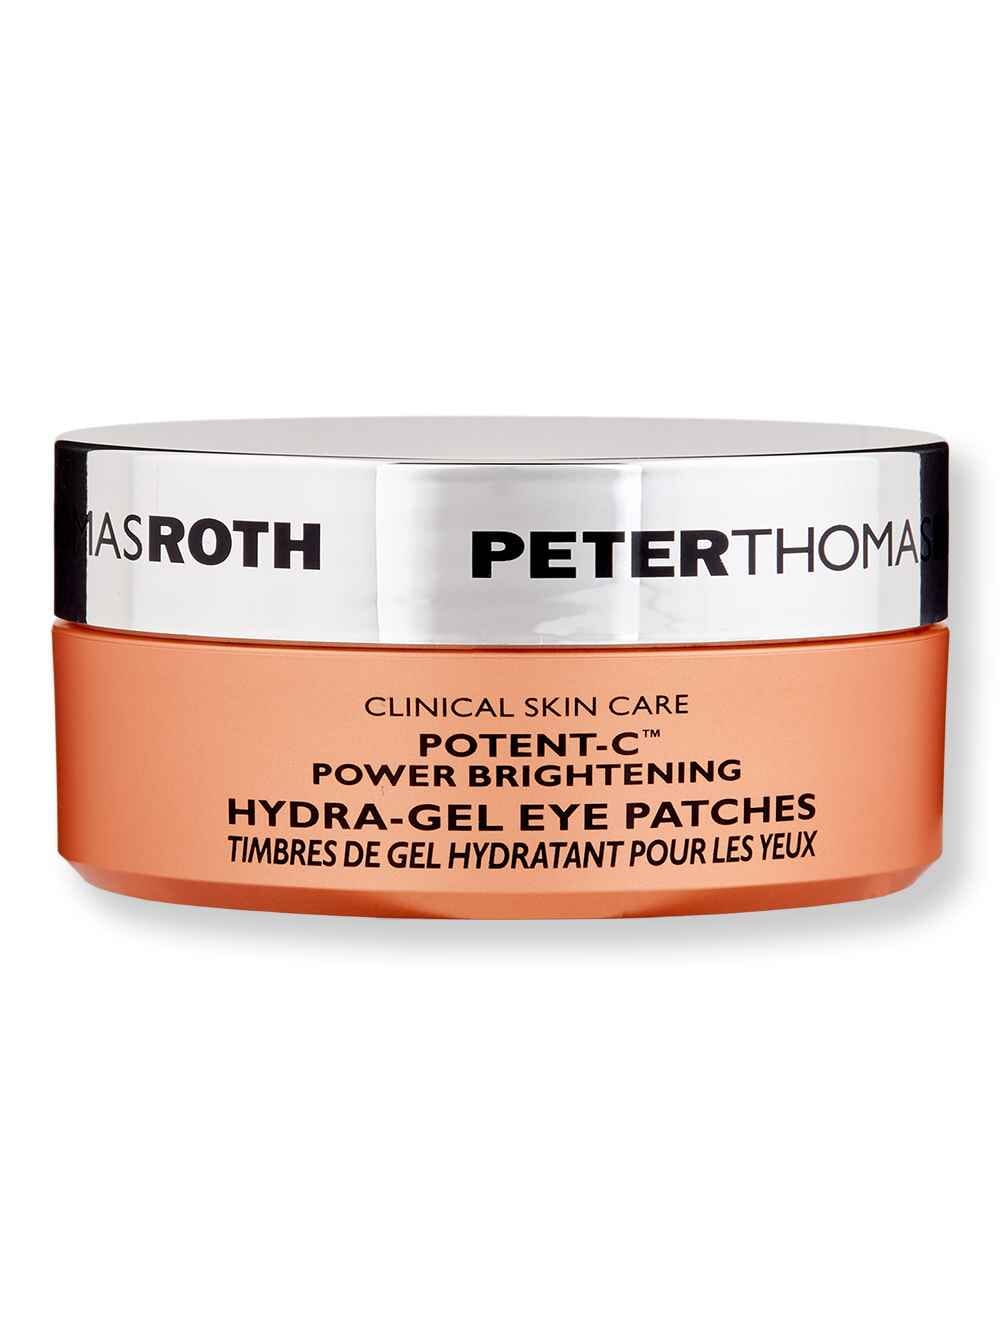 Peter Thomas Roth Peter Thomas Roth Potent-C Power Brightening Hydra-Gel Eye Patches 30 Pairs Eye Treatments 